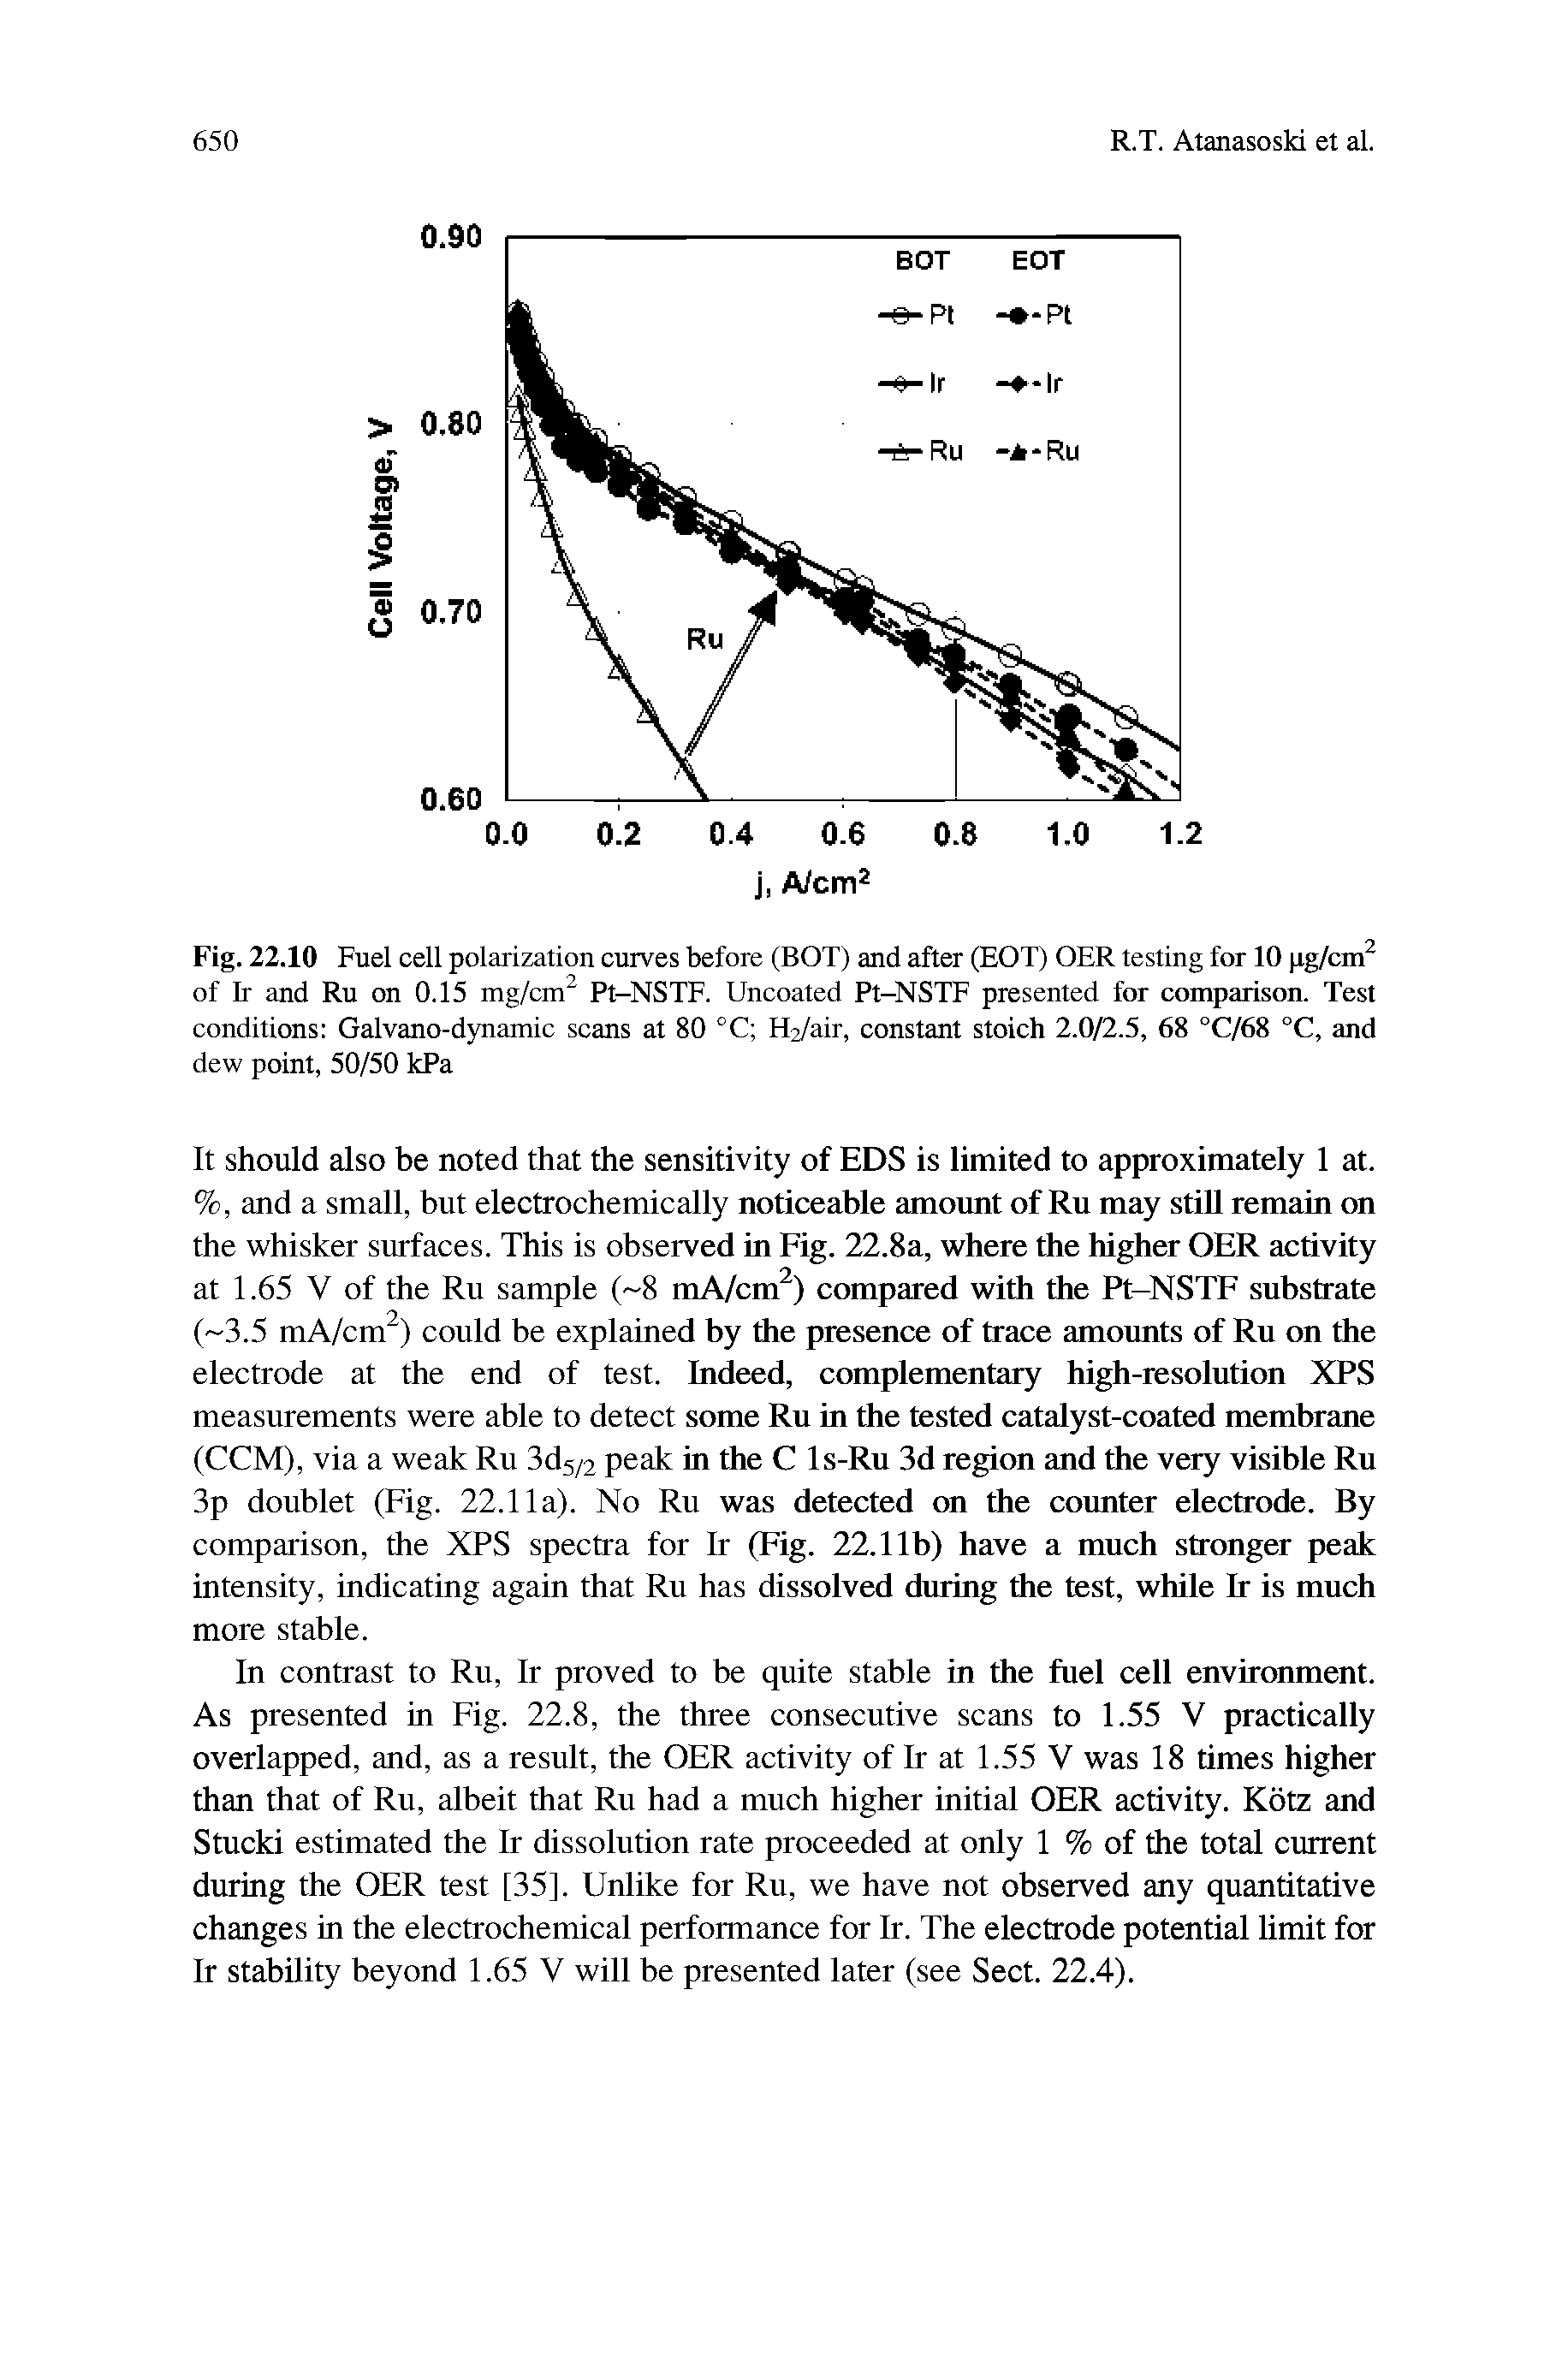 Fig. 22.10 Fuel cell polarization curves before (BOX) and after (EOT) OER testing for 10 ig/cm of E and Ru on 0.15 mg/cm Pt-NSTF. Uncoated Pt-NSTF presented for comparison. Test conditions Galvano-dynamic scans at 80 °C H2/air, constant stoich 2.0/2.5, 68 °C/68 °C, and dew point, 50/50 kPa...